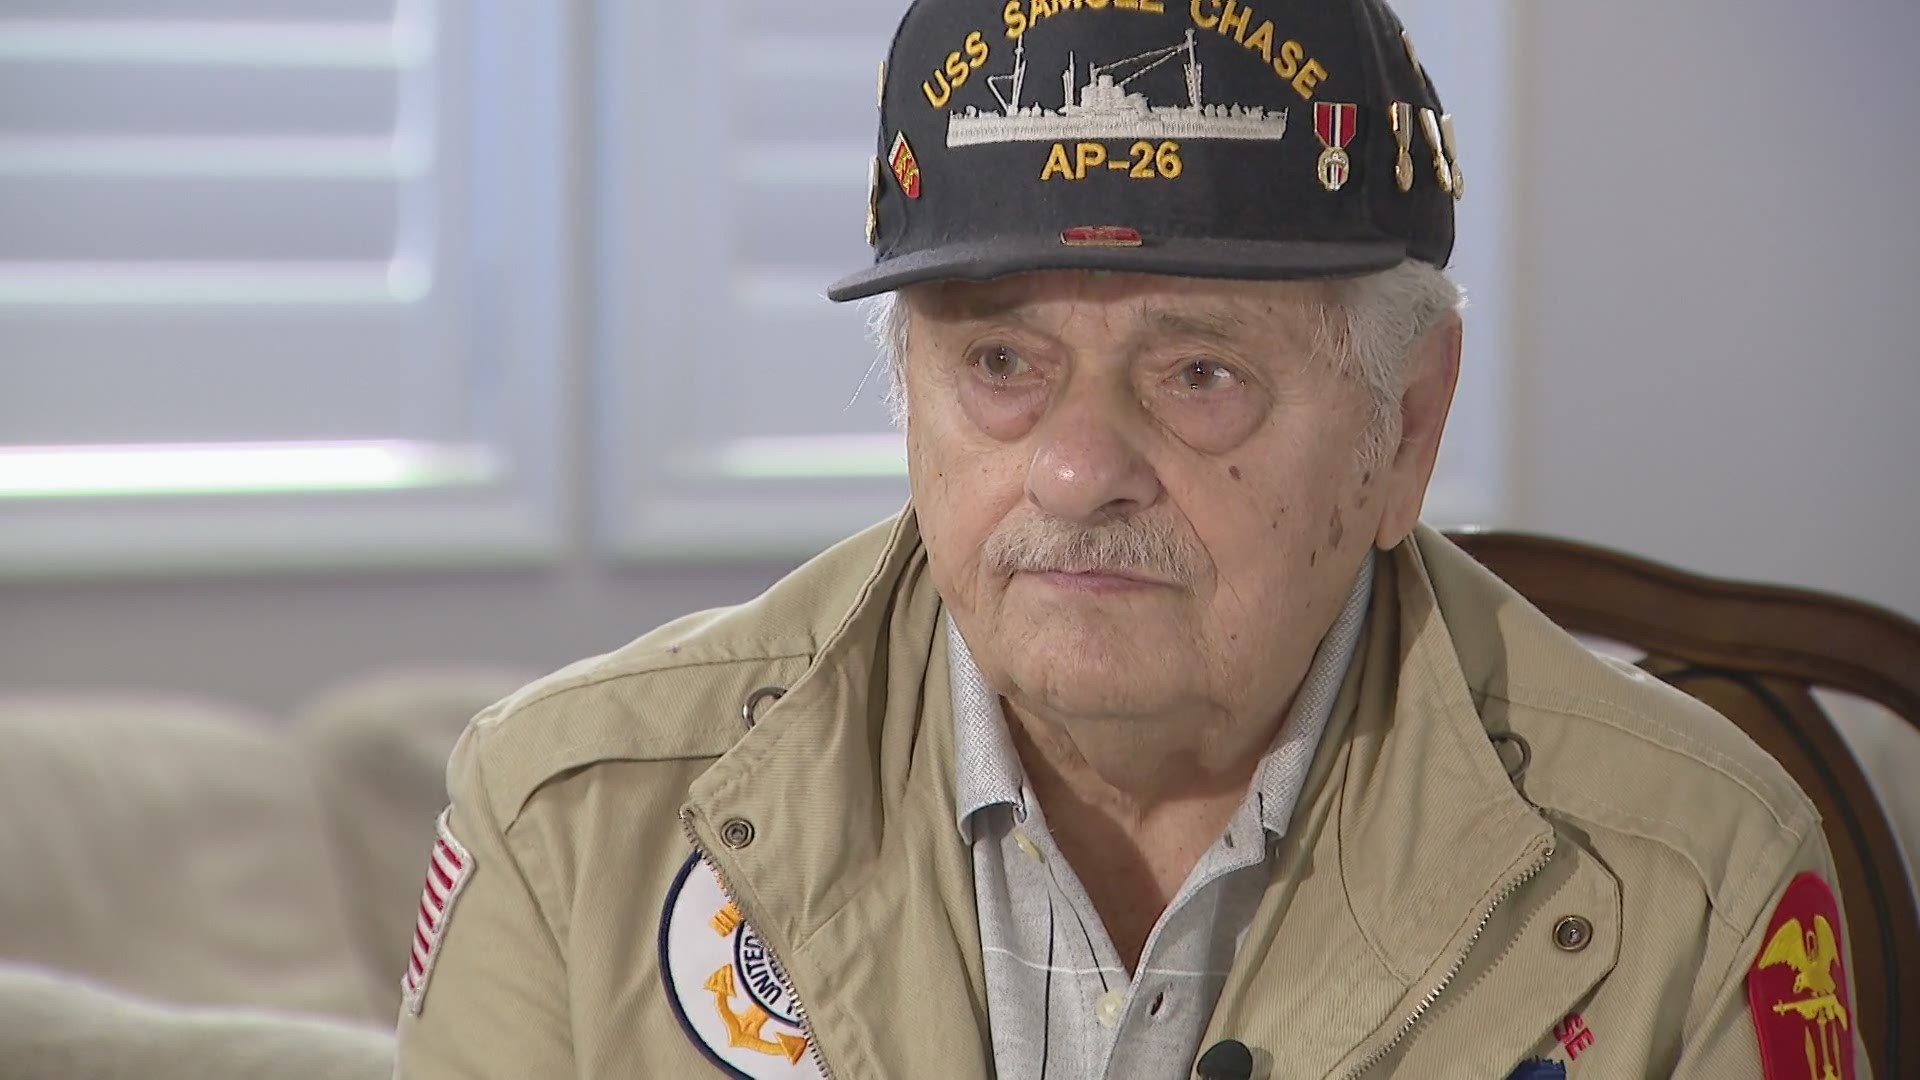 Frank Devita was just a 19-year-old Coast Guard member when he was one of the first soldiers to storm Omaha Beach in the Normandy region of France on June 6, 1944. He shared his story ahead of a recent trip to France.